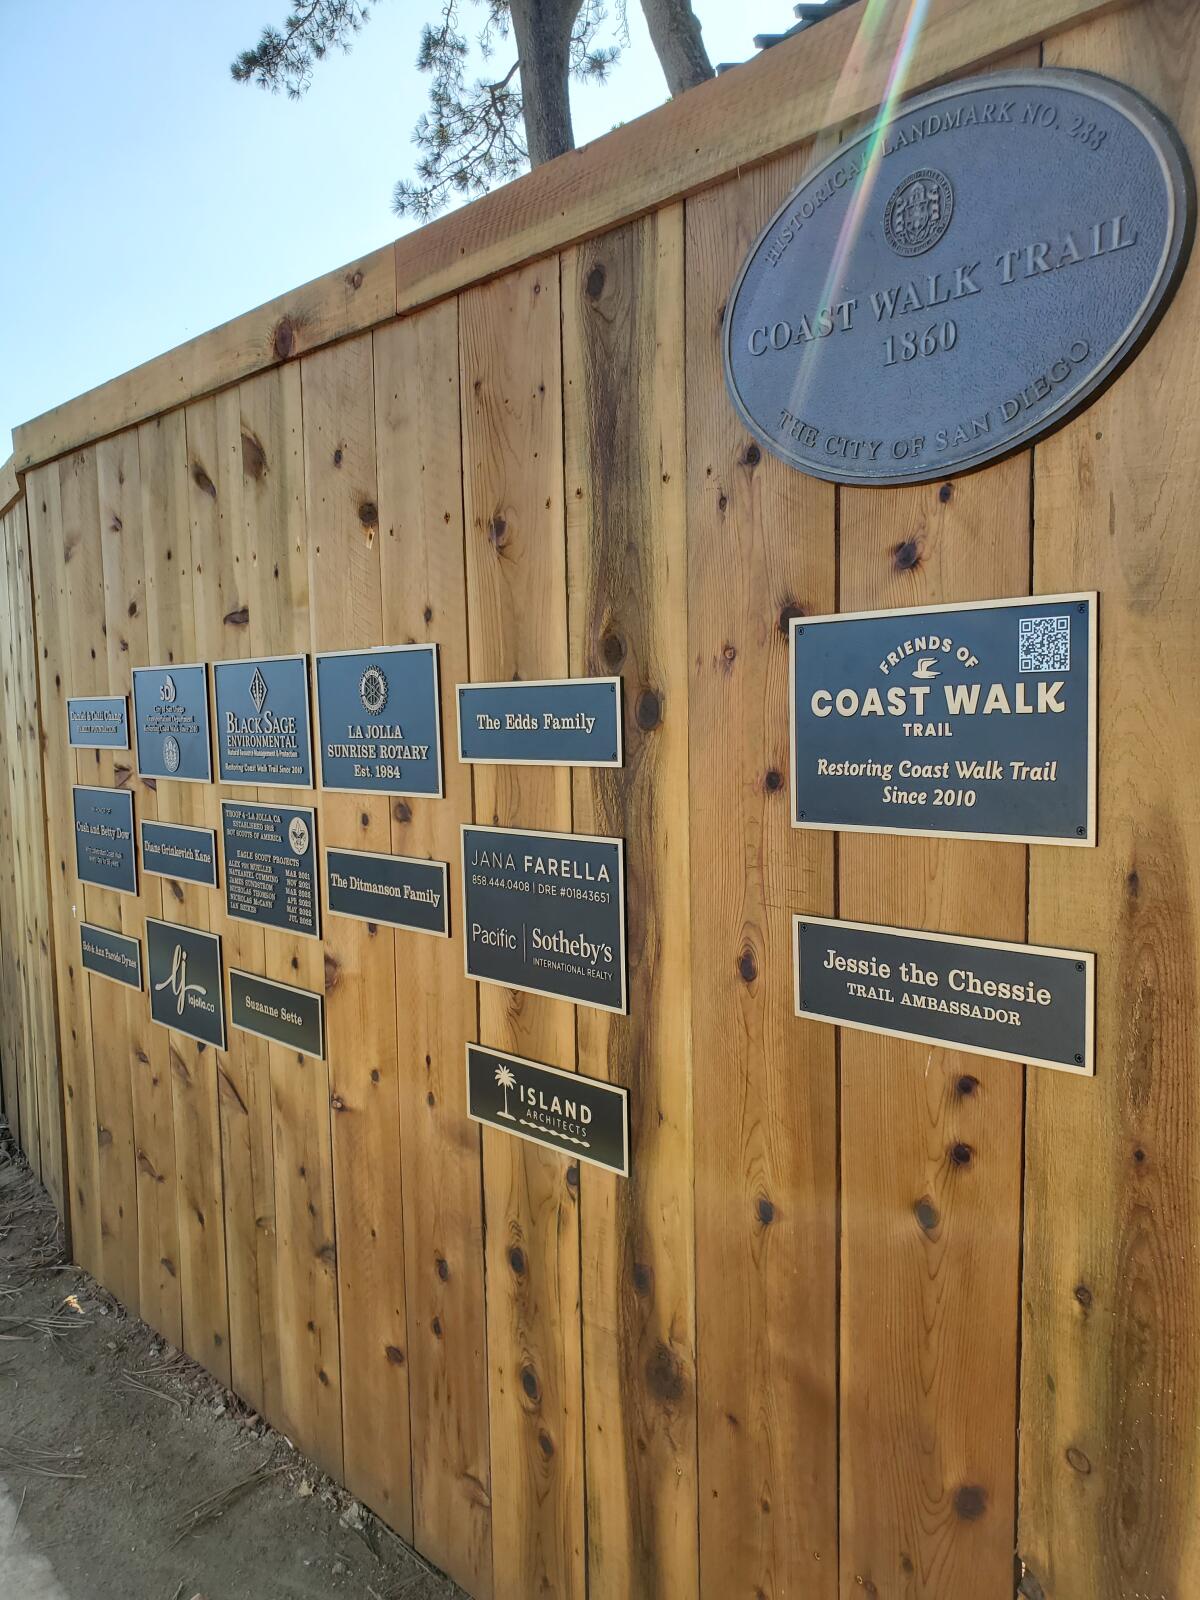 The Friends of Coast Walk Legacy Wall is in its early stages.